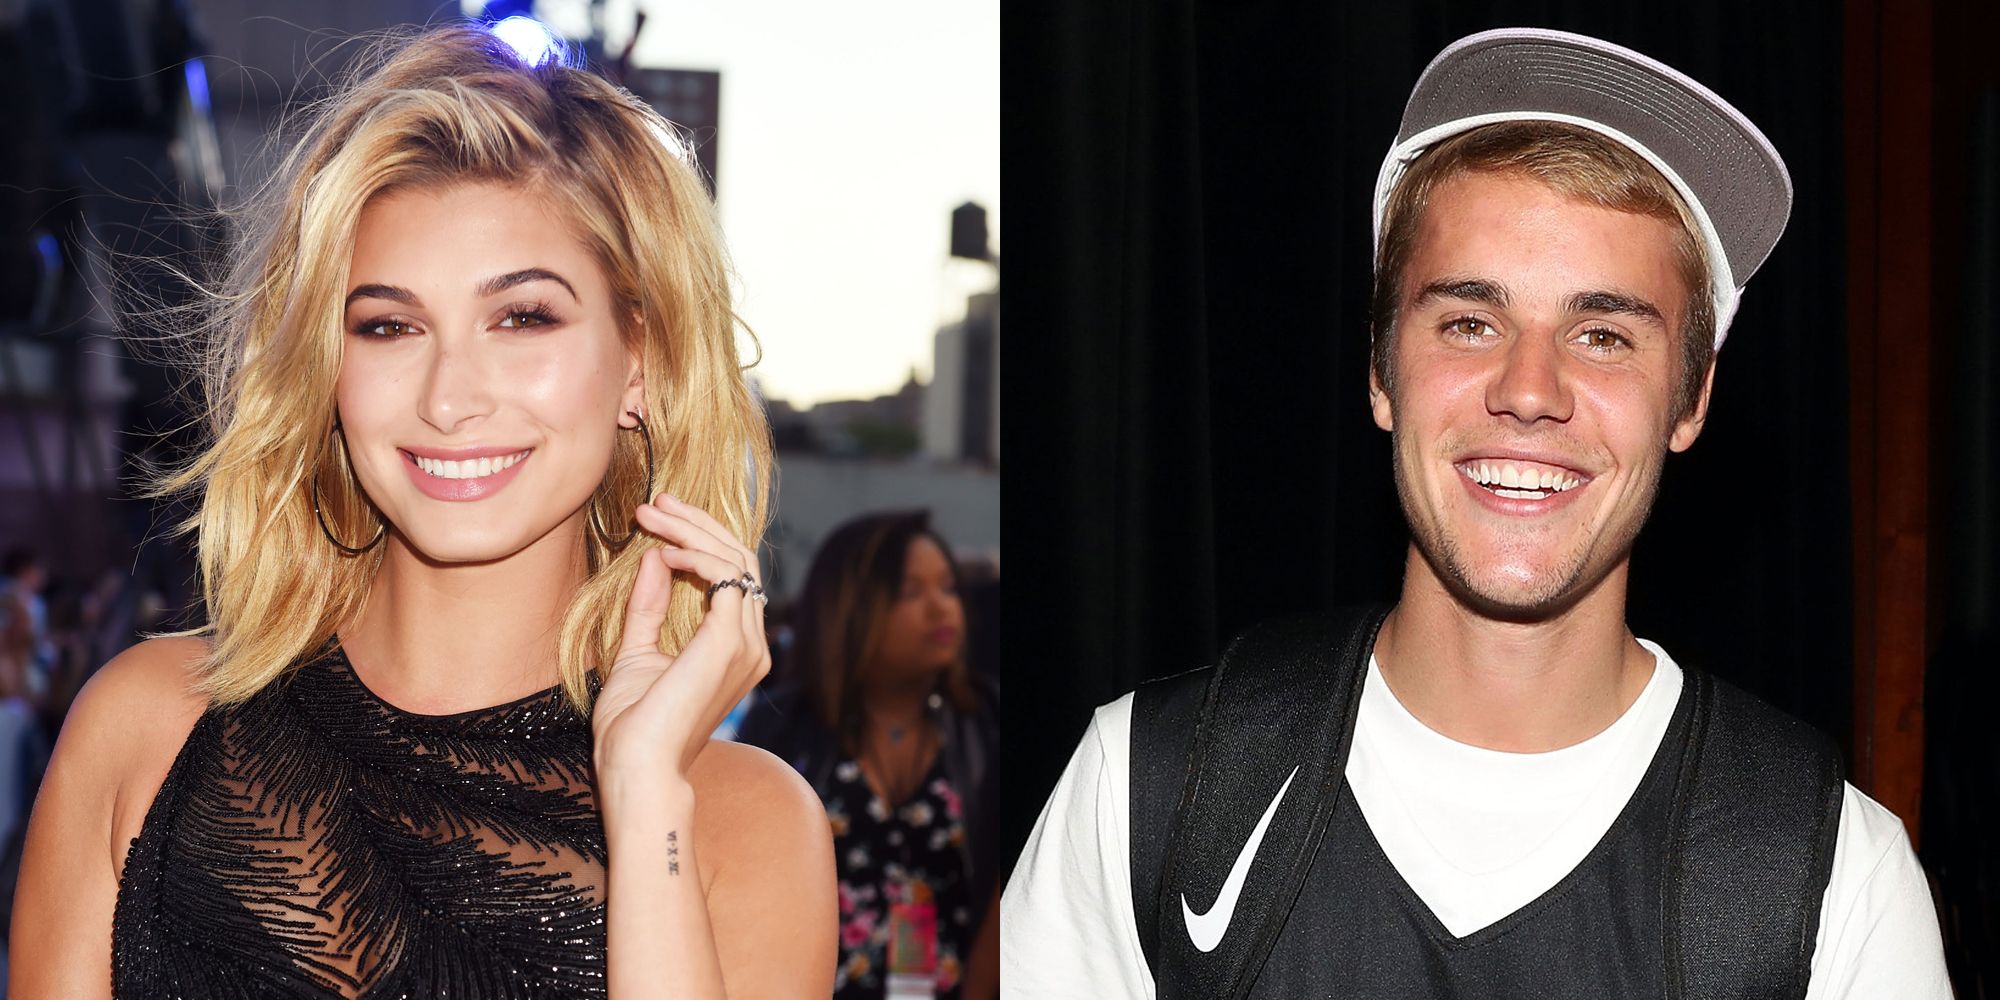 Justin Bieber Rocks Huge Engagement Ring From Hailey Baldwin [PIC]